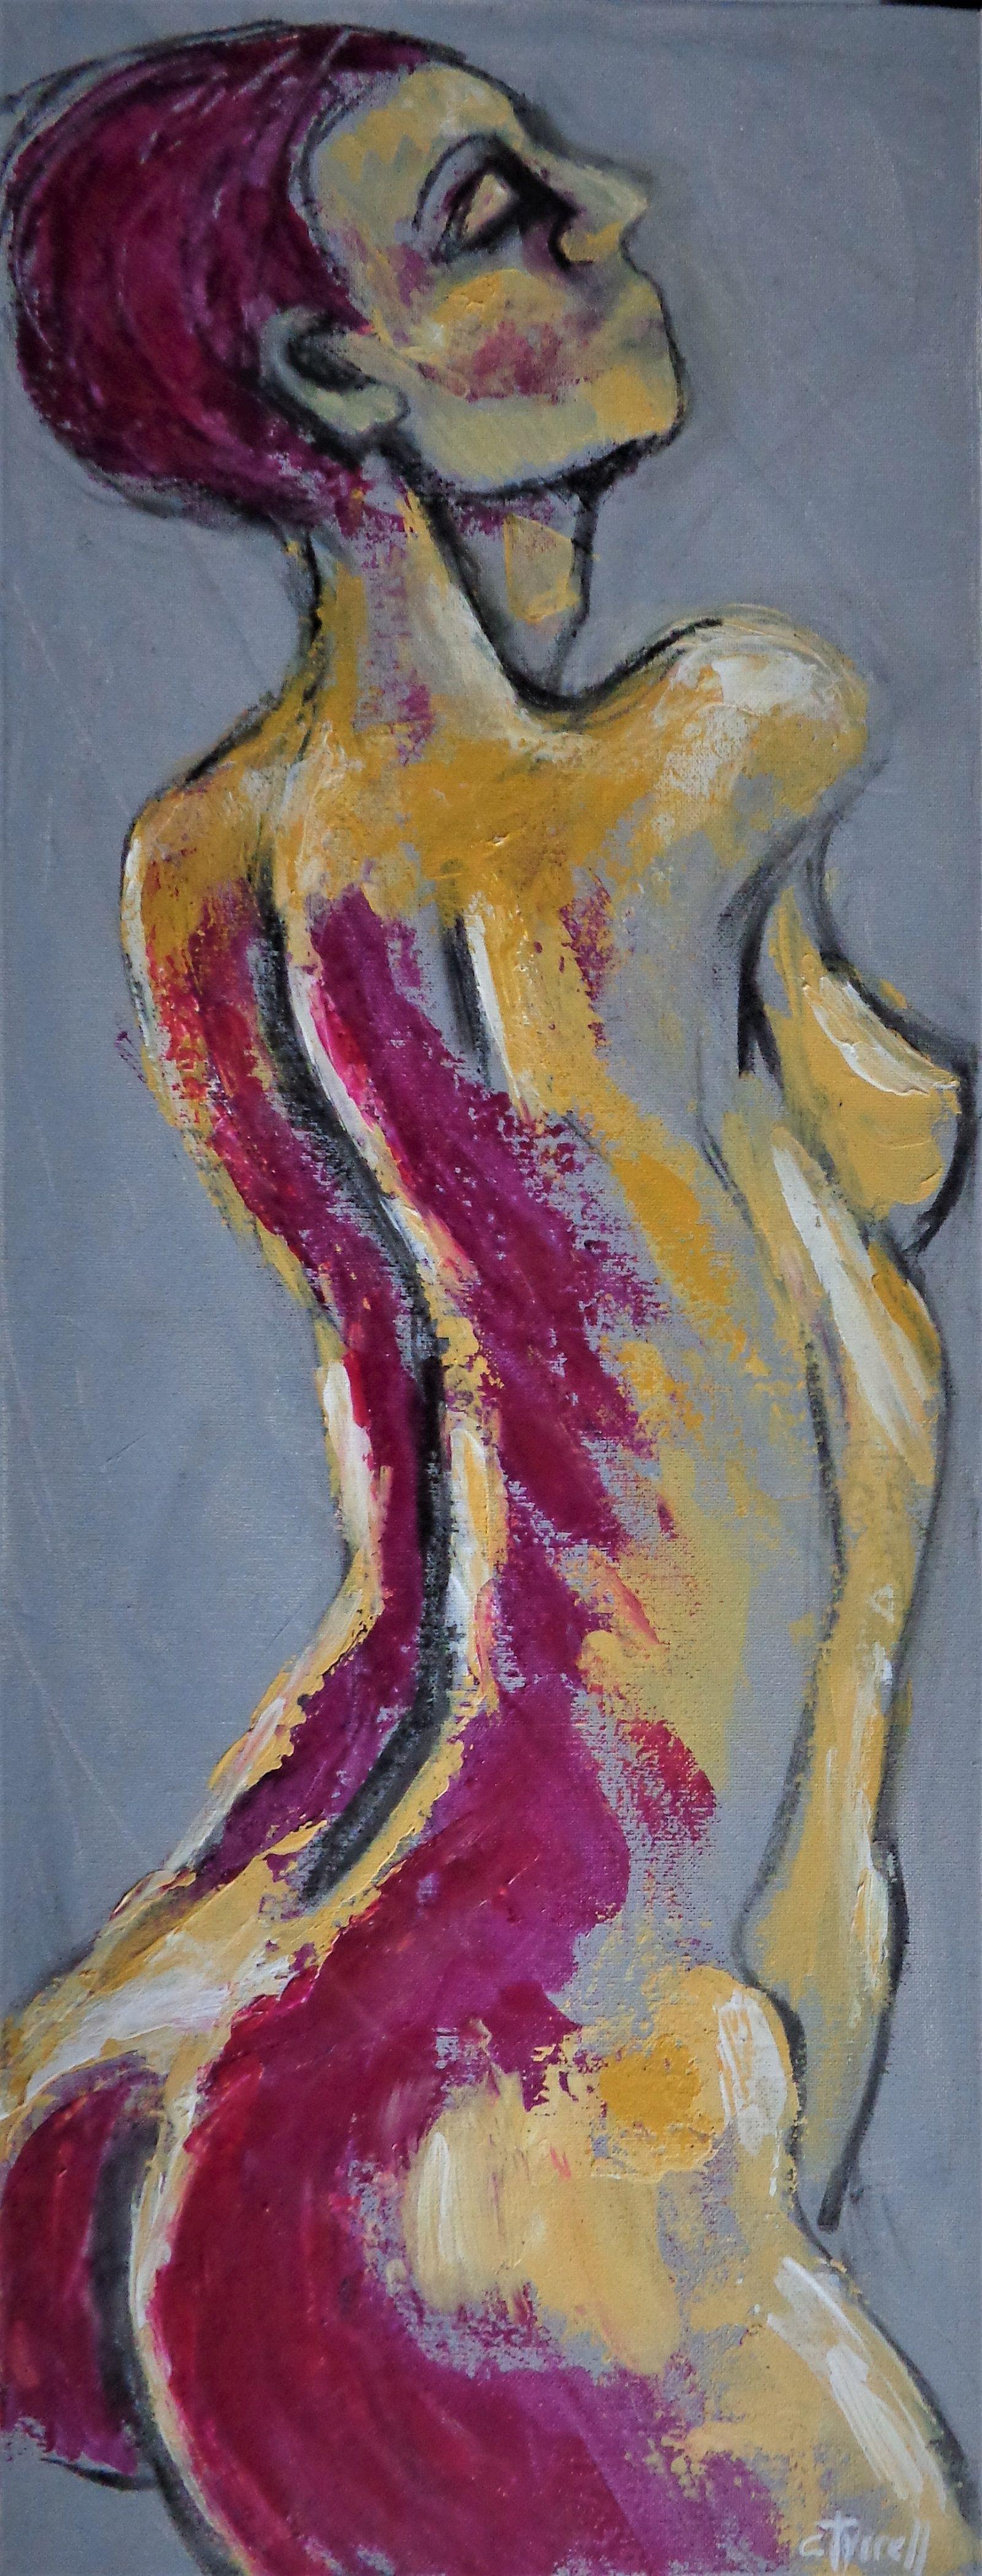 Original figurative textured acrylics paintings on deep edge canvas, unframed, ready to hang. From the series of 